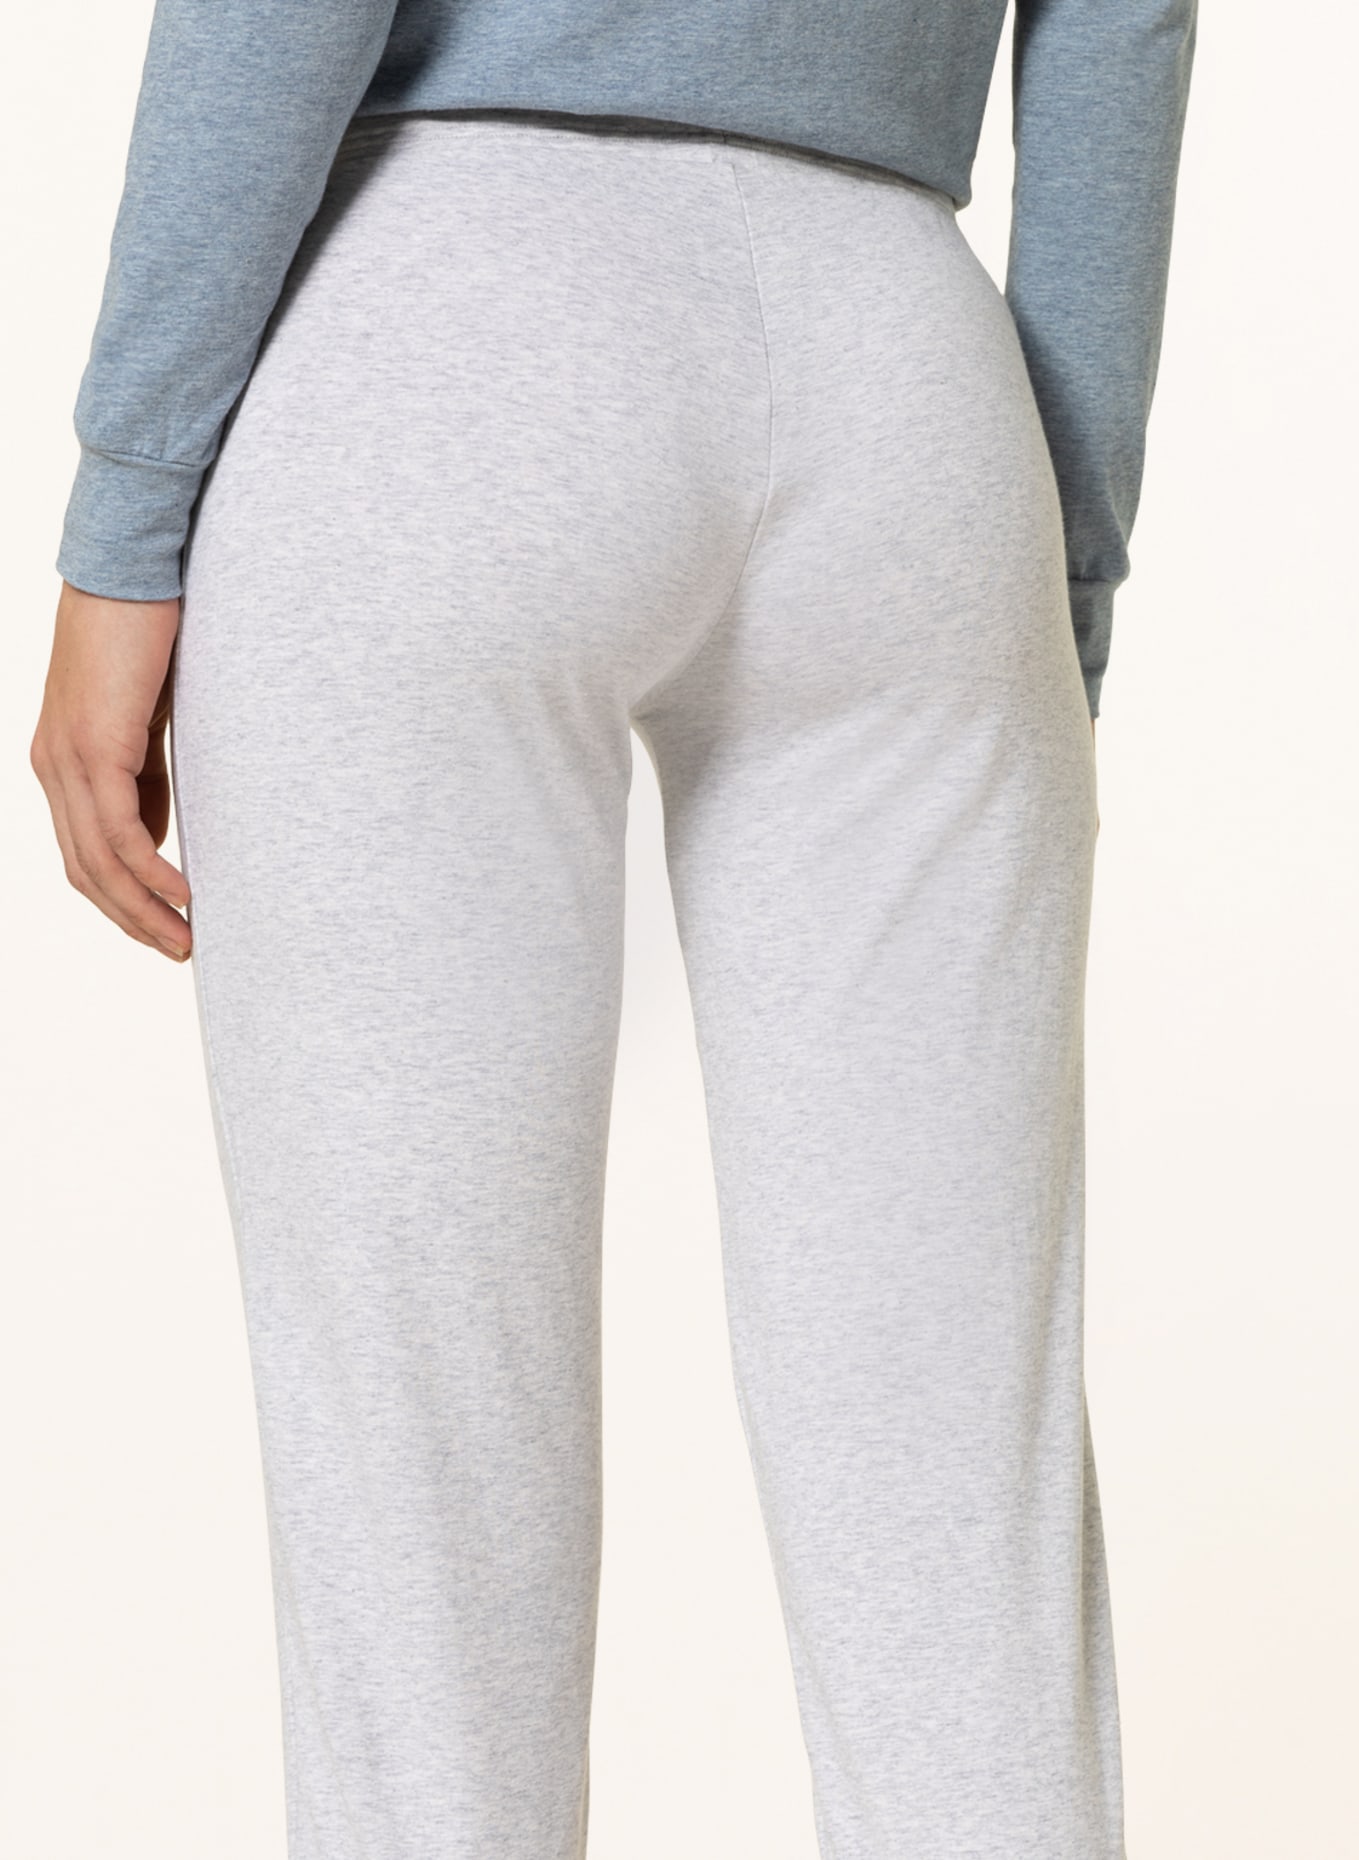 Skiny Pajama pants EVERY NIGHT IN MIX & MATCH , Color: LIGHT GRAY (Image 5)